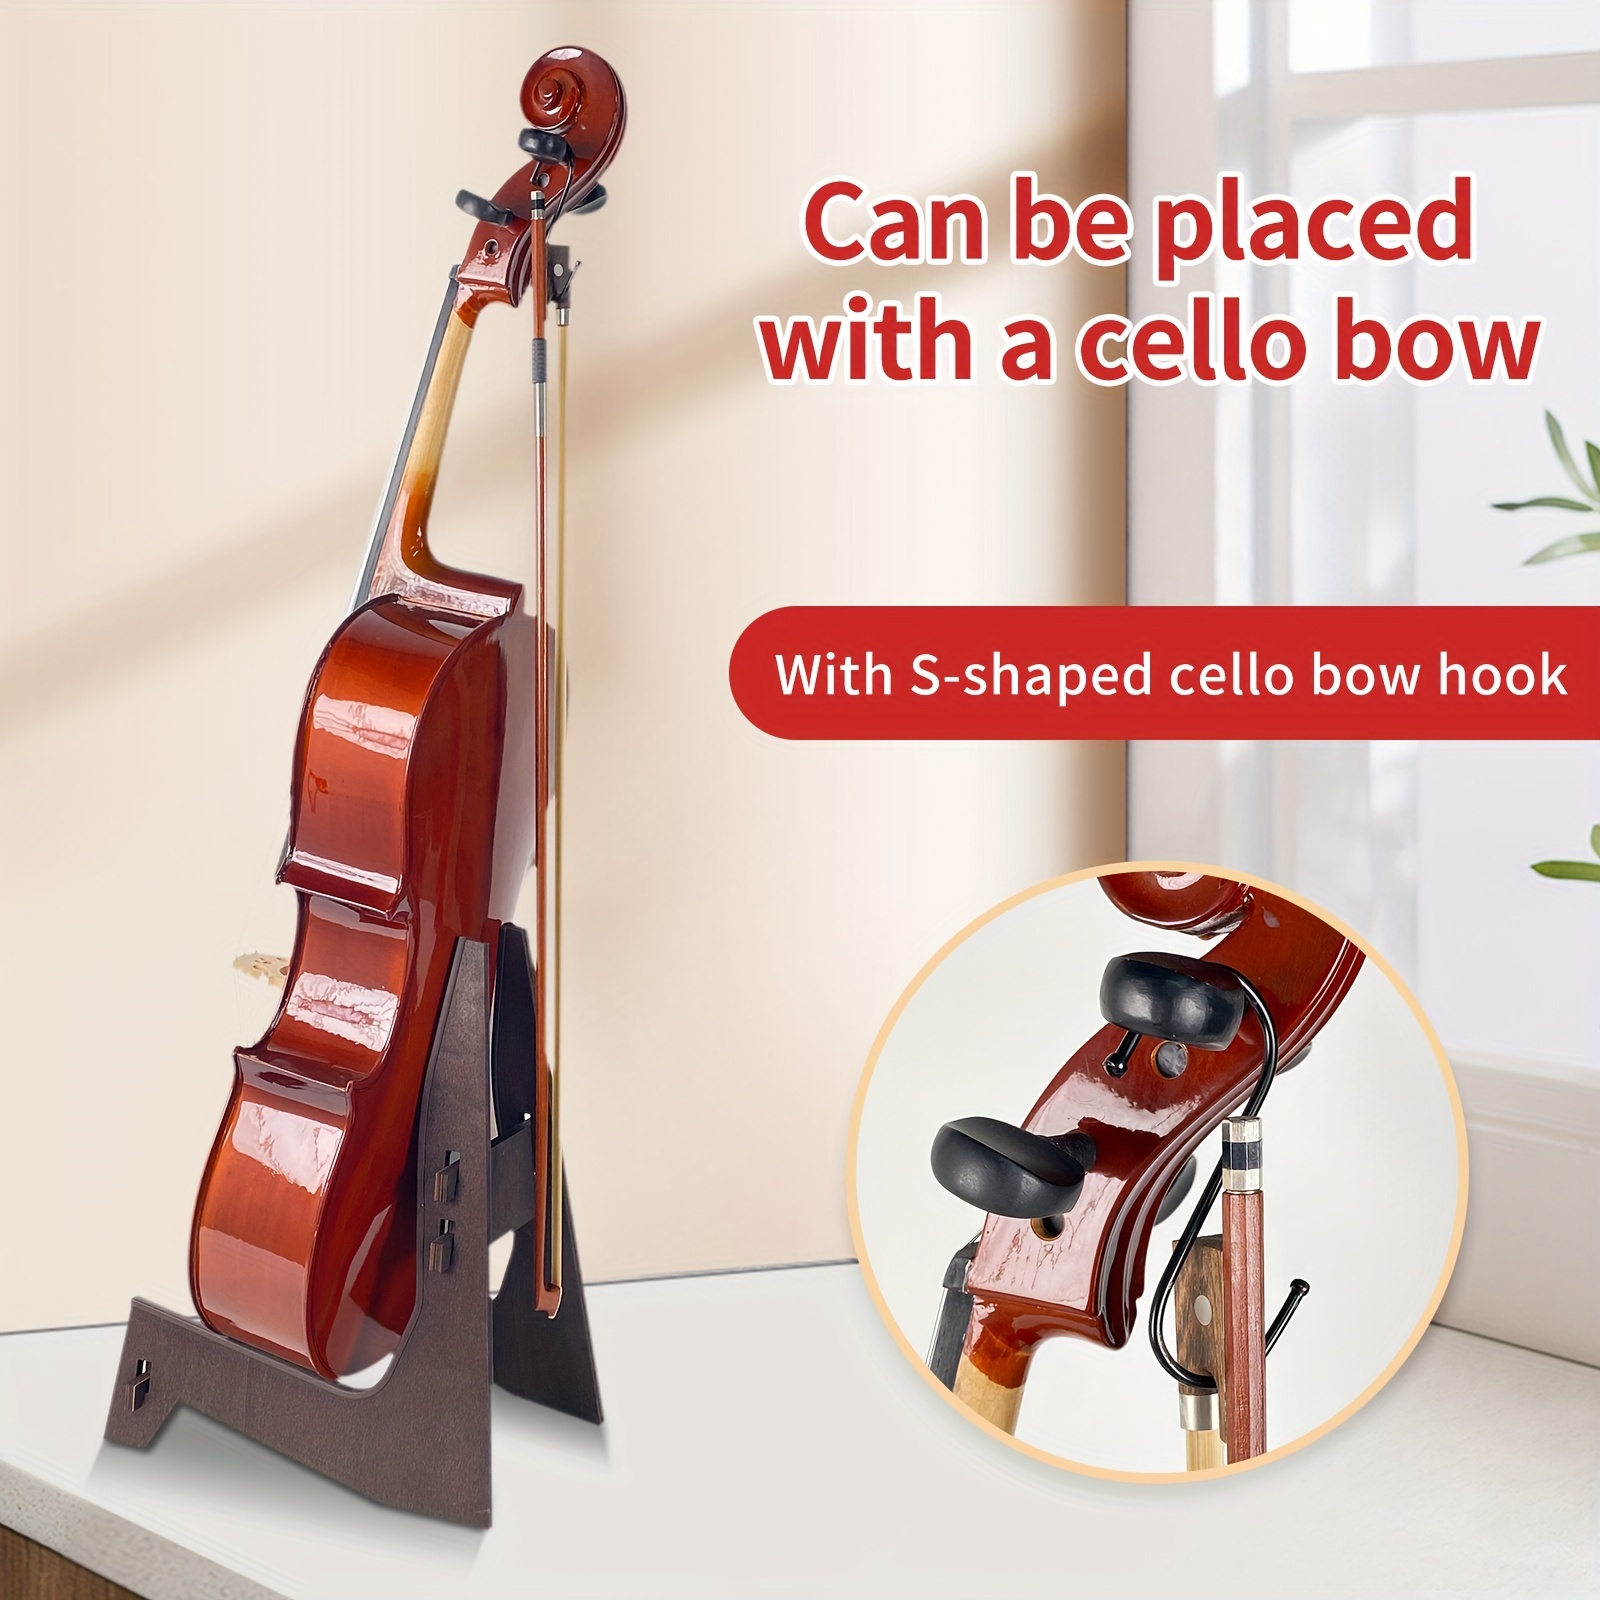 

Wood Cello Stand - Portable Cello Instrument Stand Floor Holder Stand For Cellos Of All Sizes (1/8-4/4)